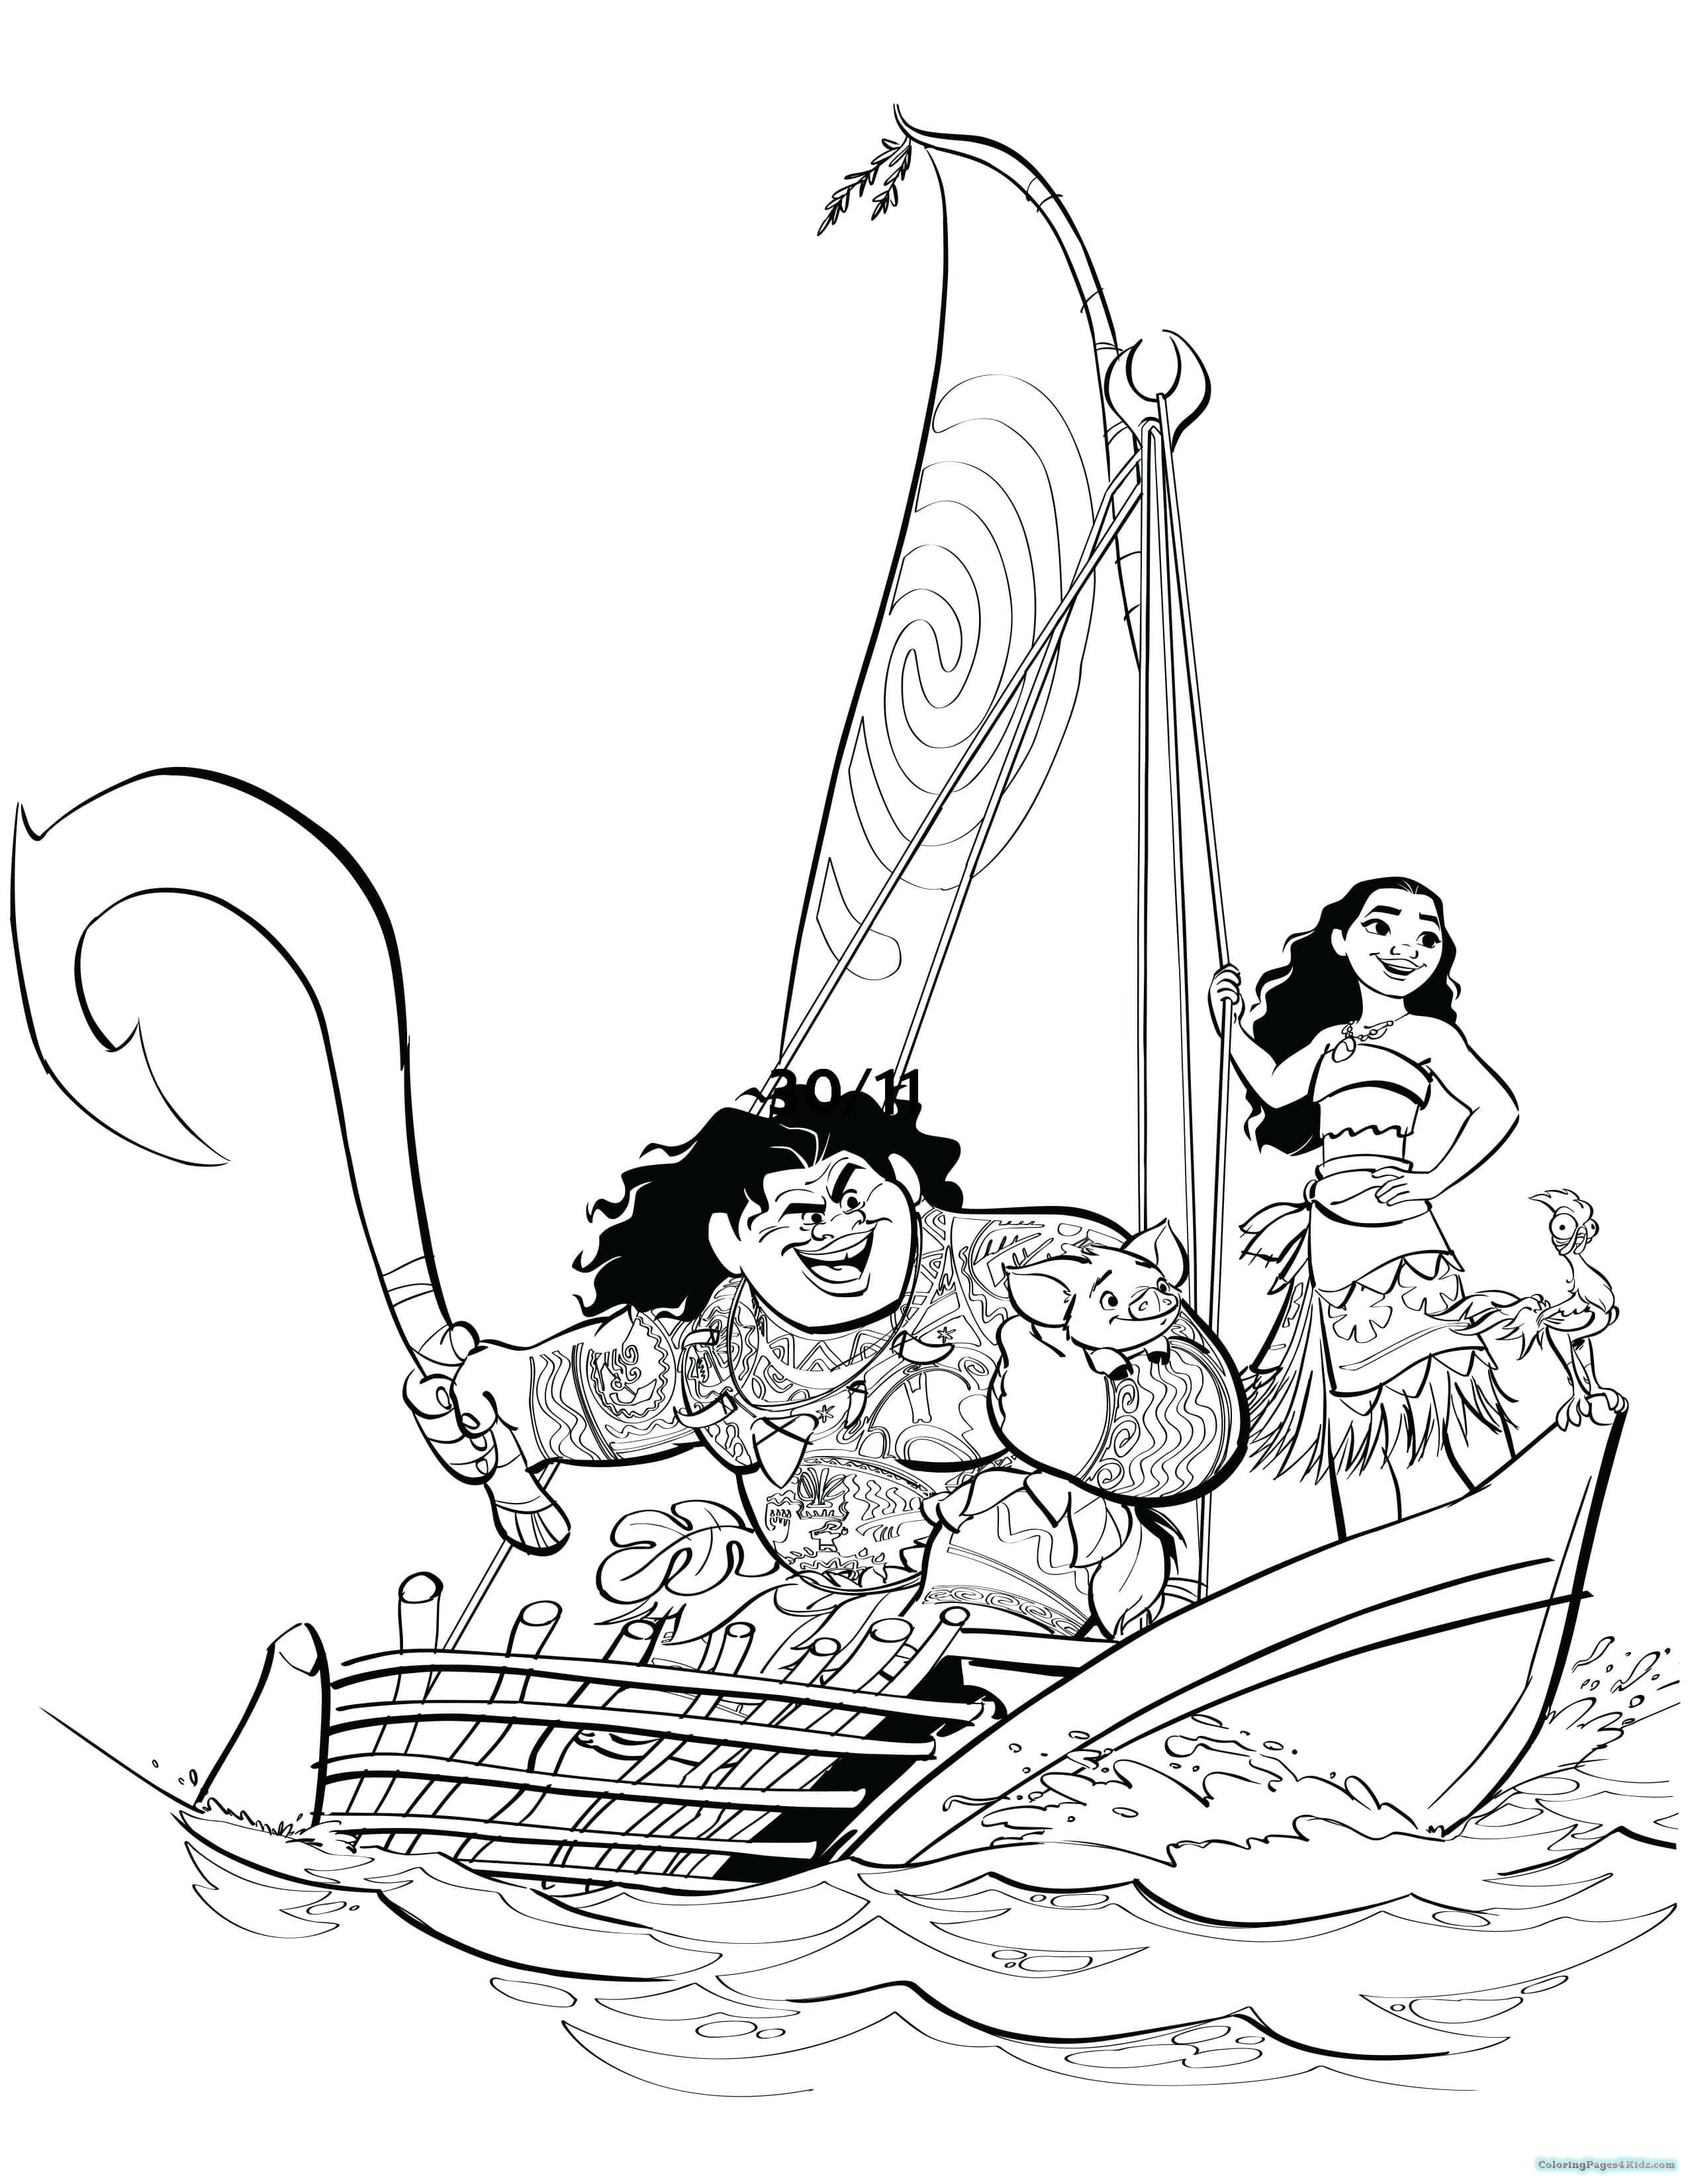 Addition Moana Coloring Pages - Coloring Pages For Kids